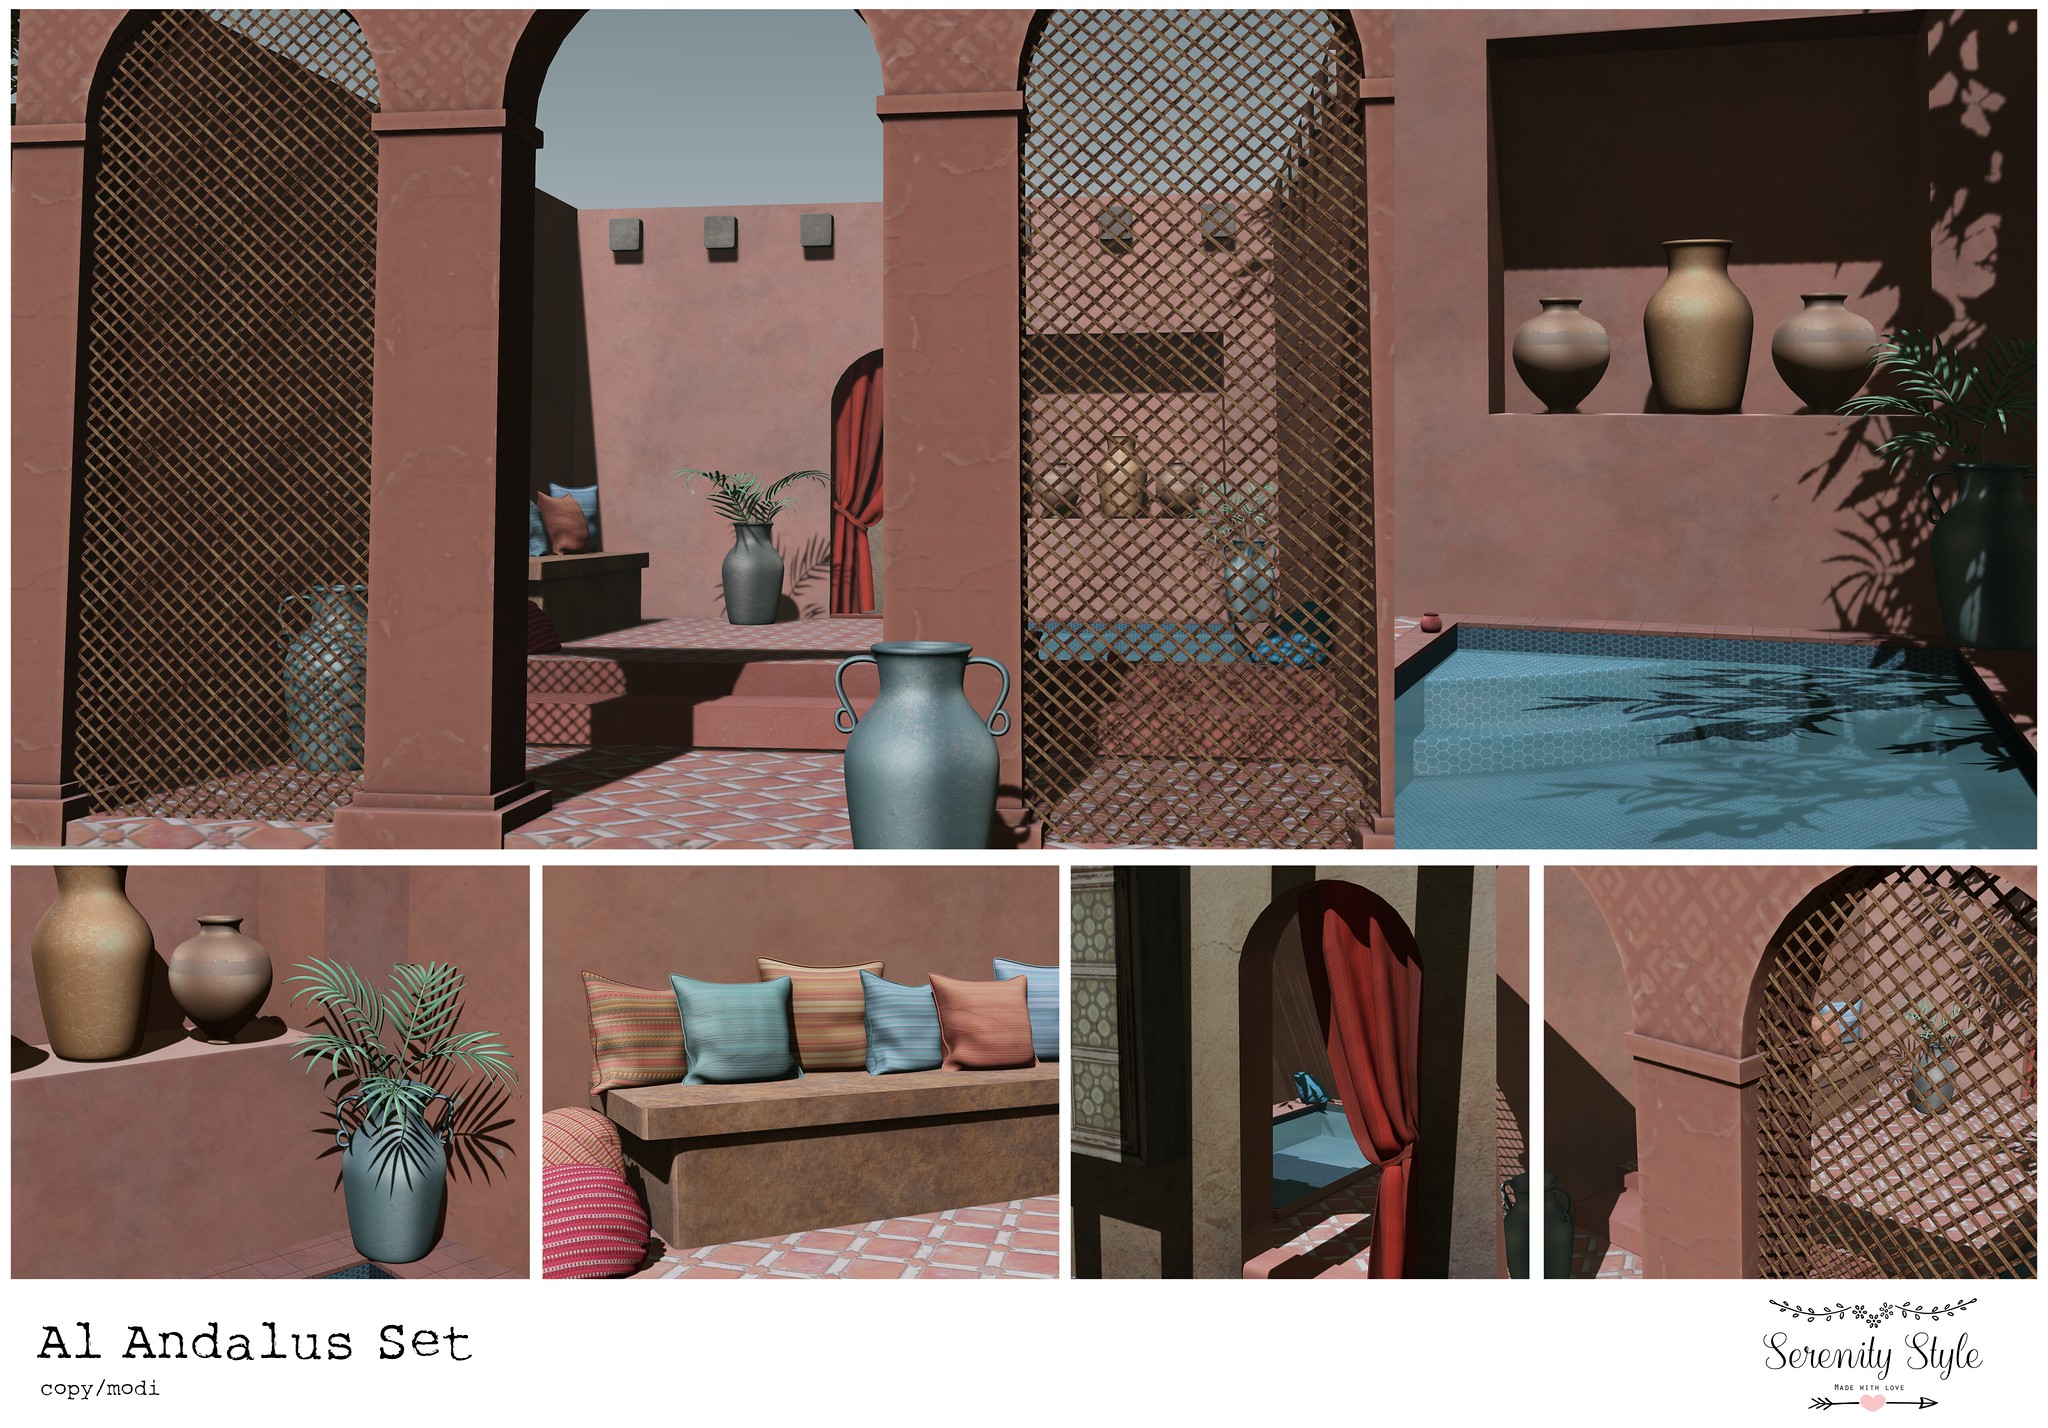 Serenity Style – Al Andalus Set